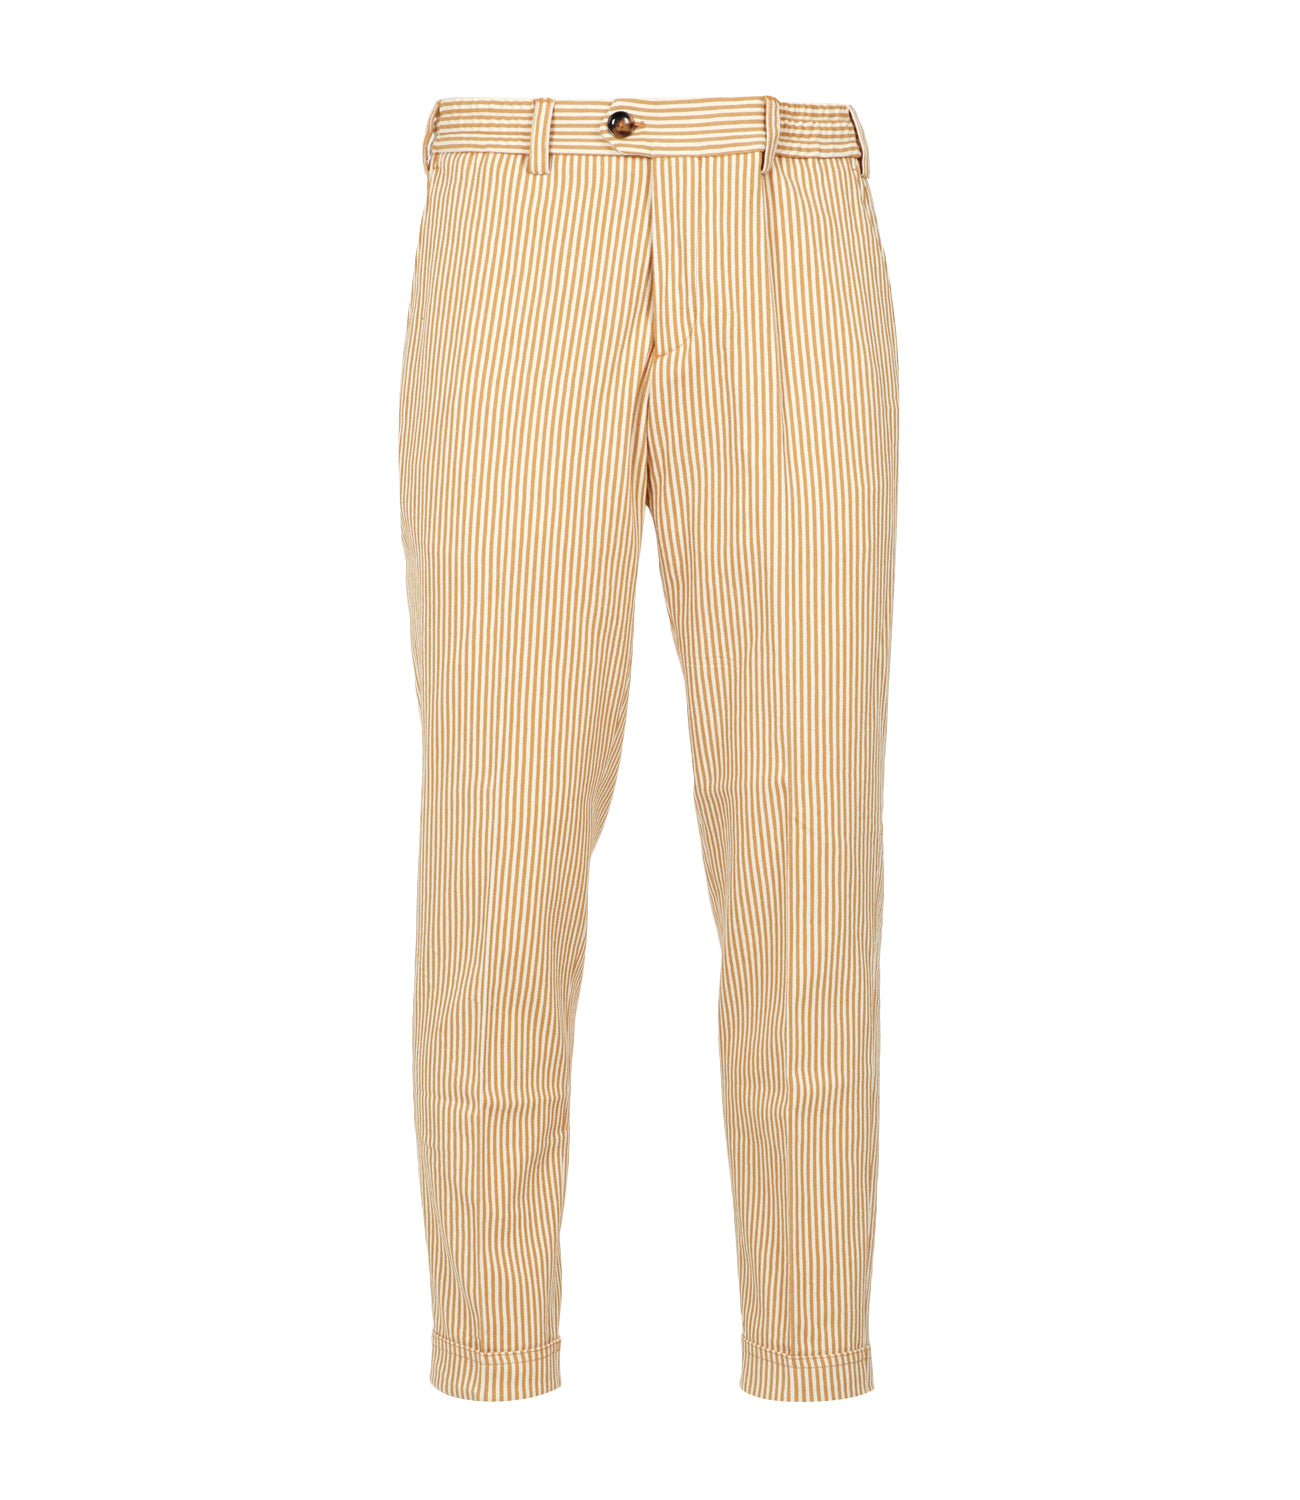 PT Torino | Cream and Camel Trousers